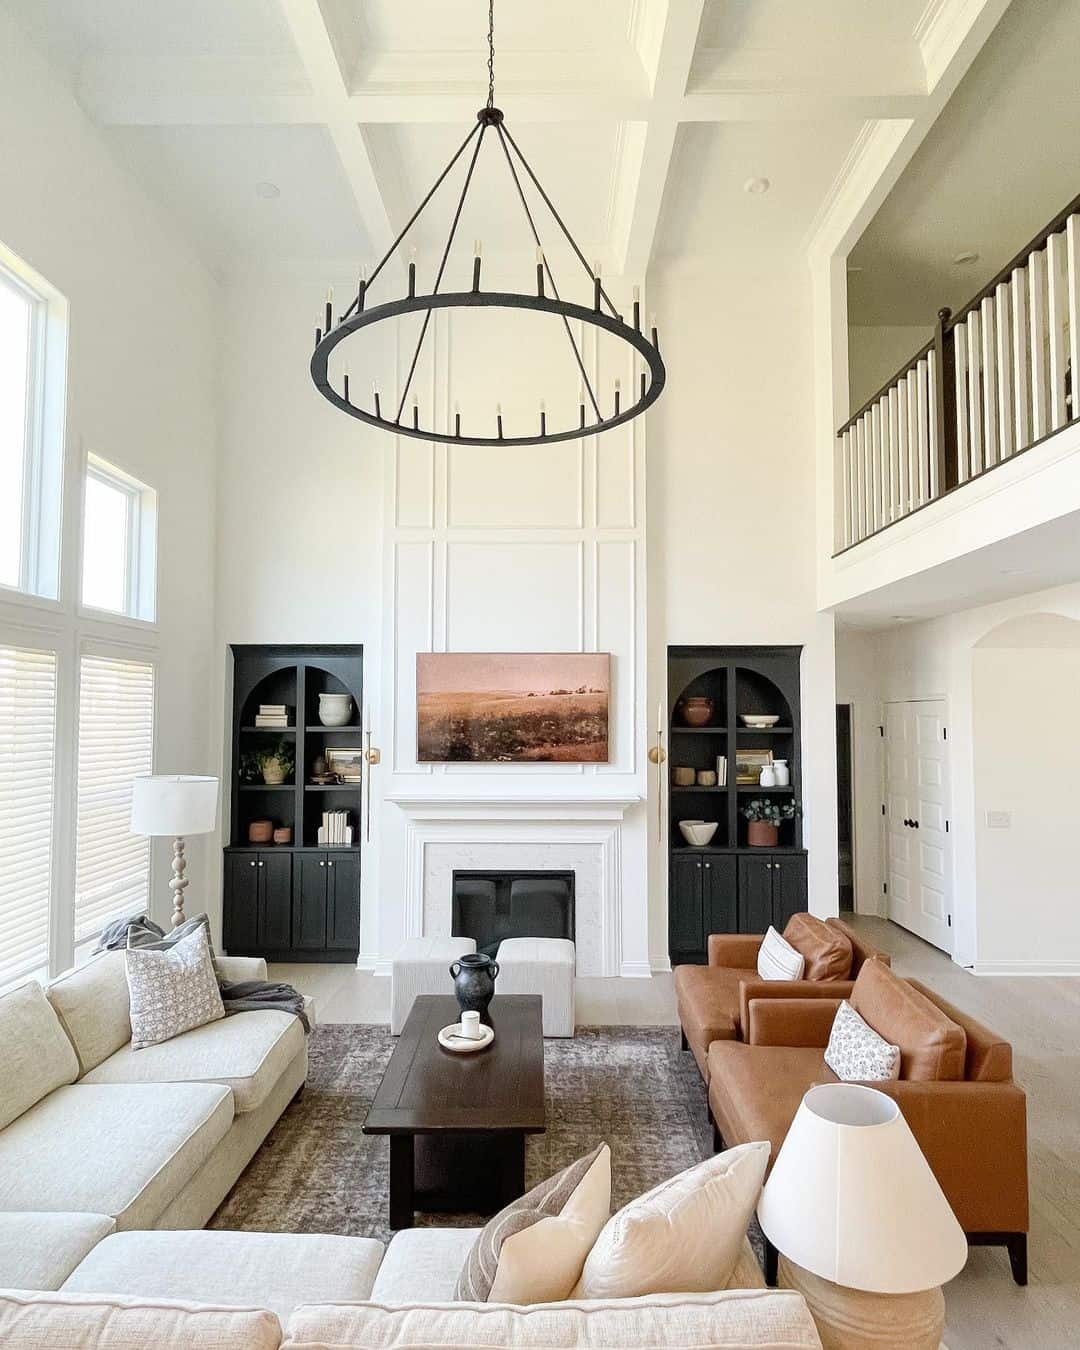 17 high ceiling light fixture ideas to change your space